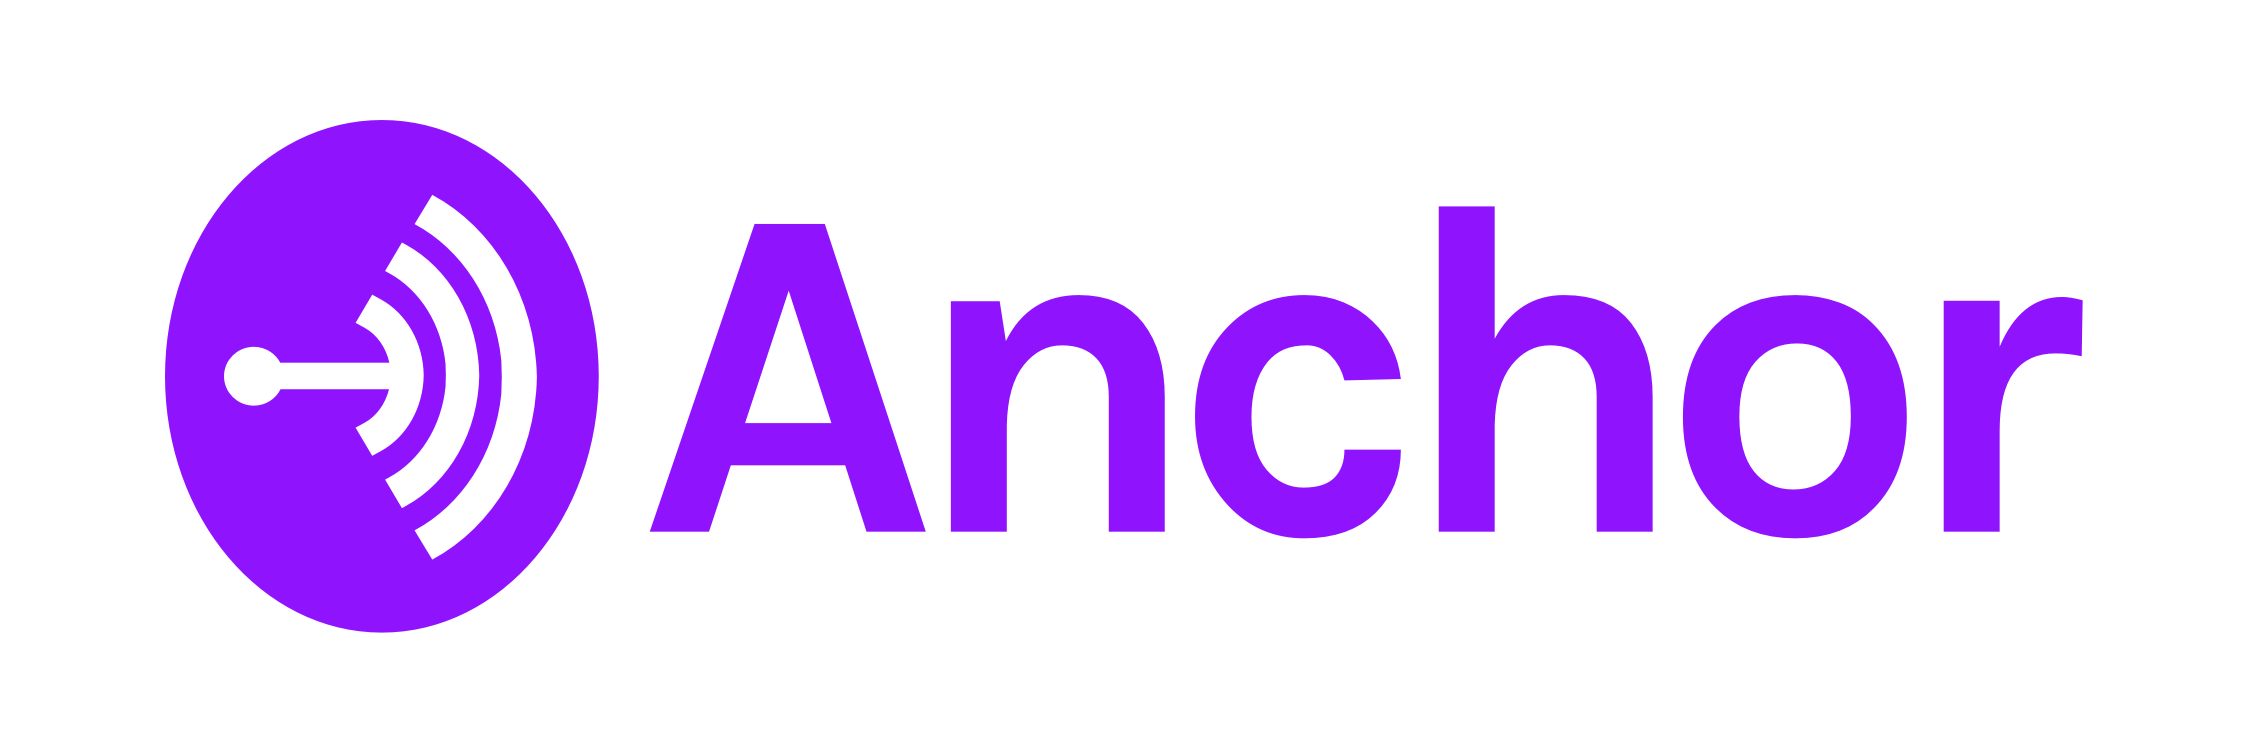 Listen to our Podcasts on Anchor